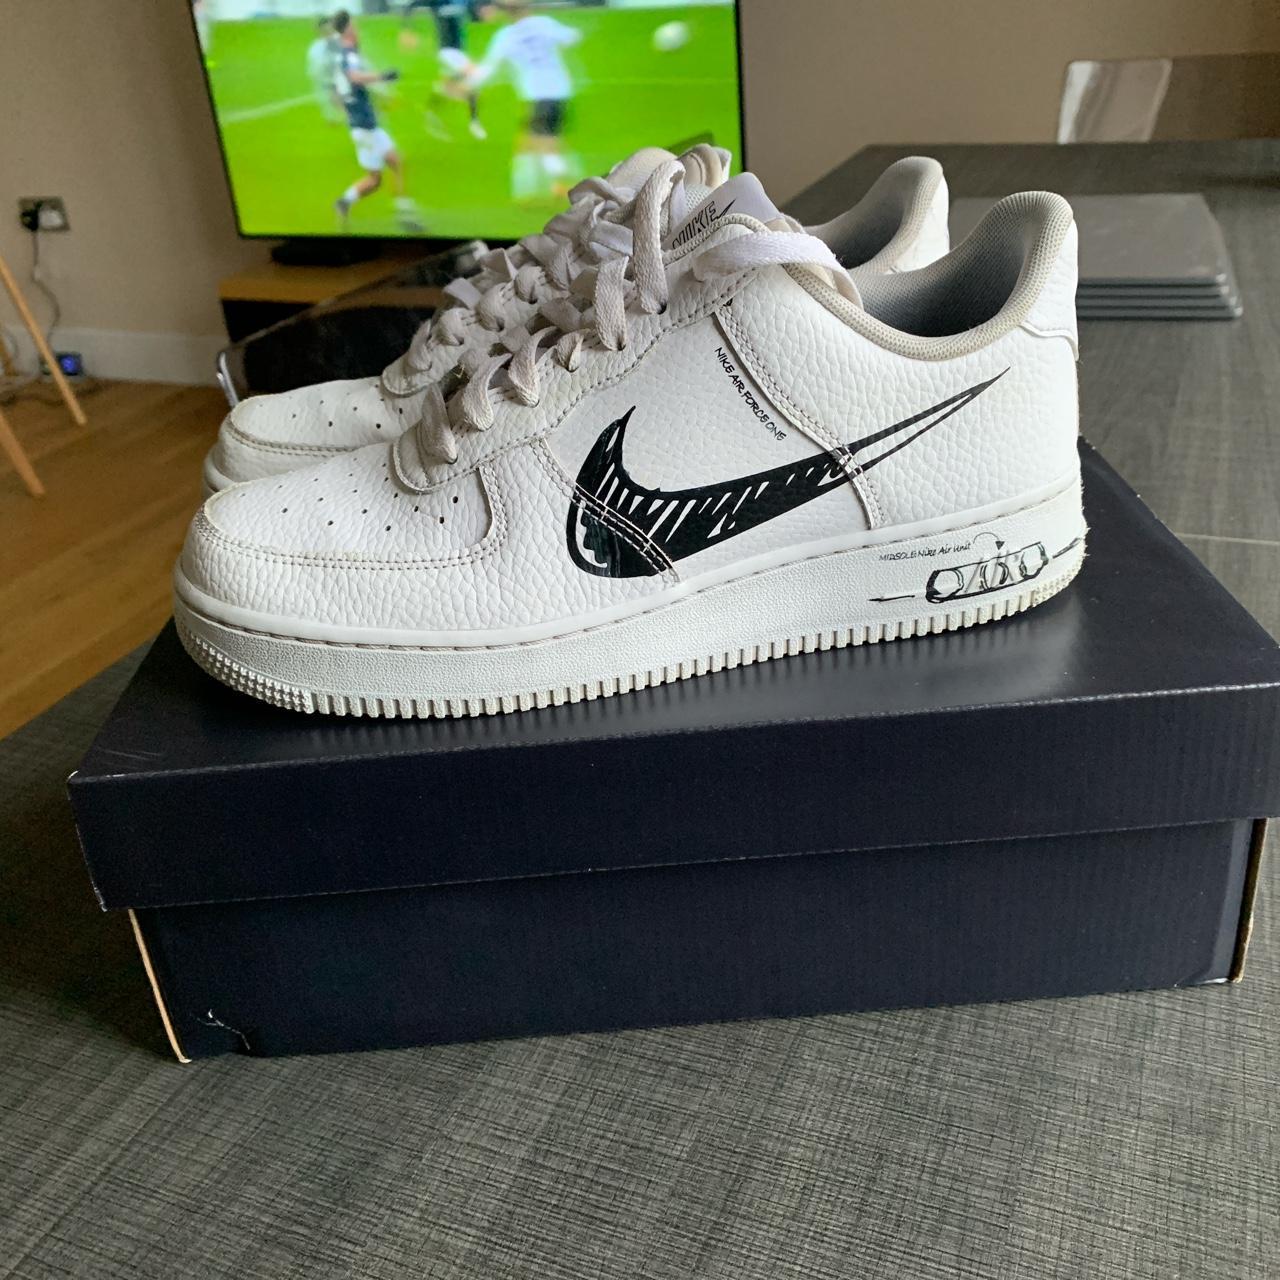 Nike Air Force 1 Black and white LV8 Utility. In... - Depop